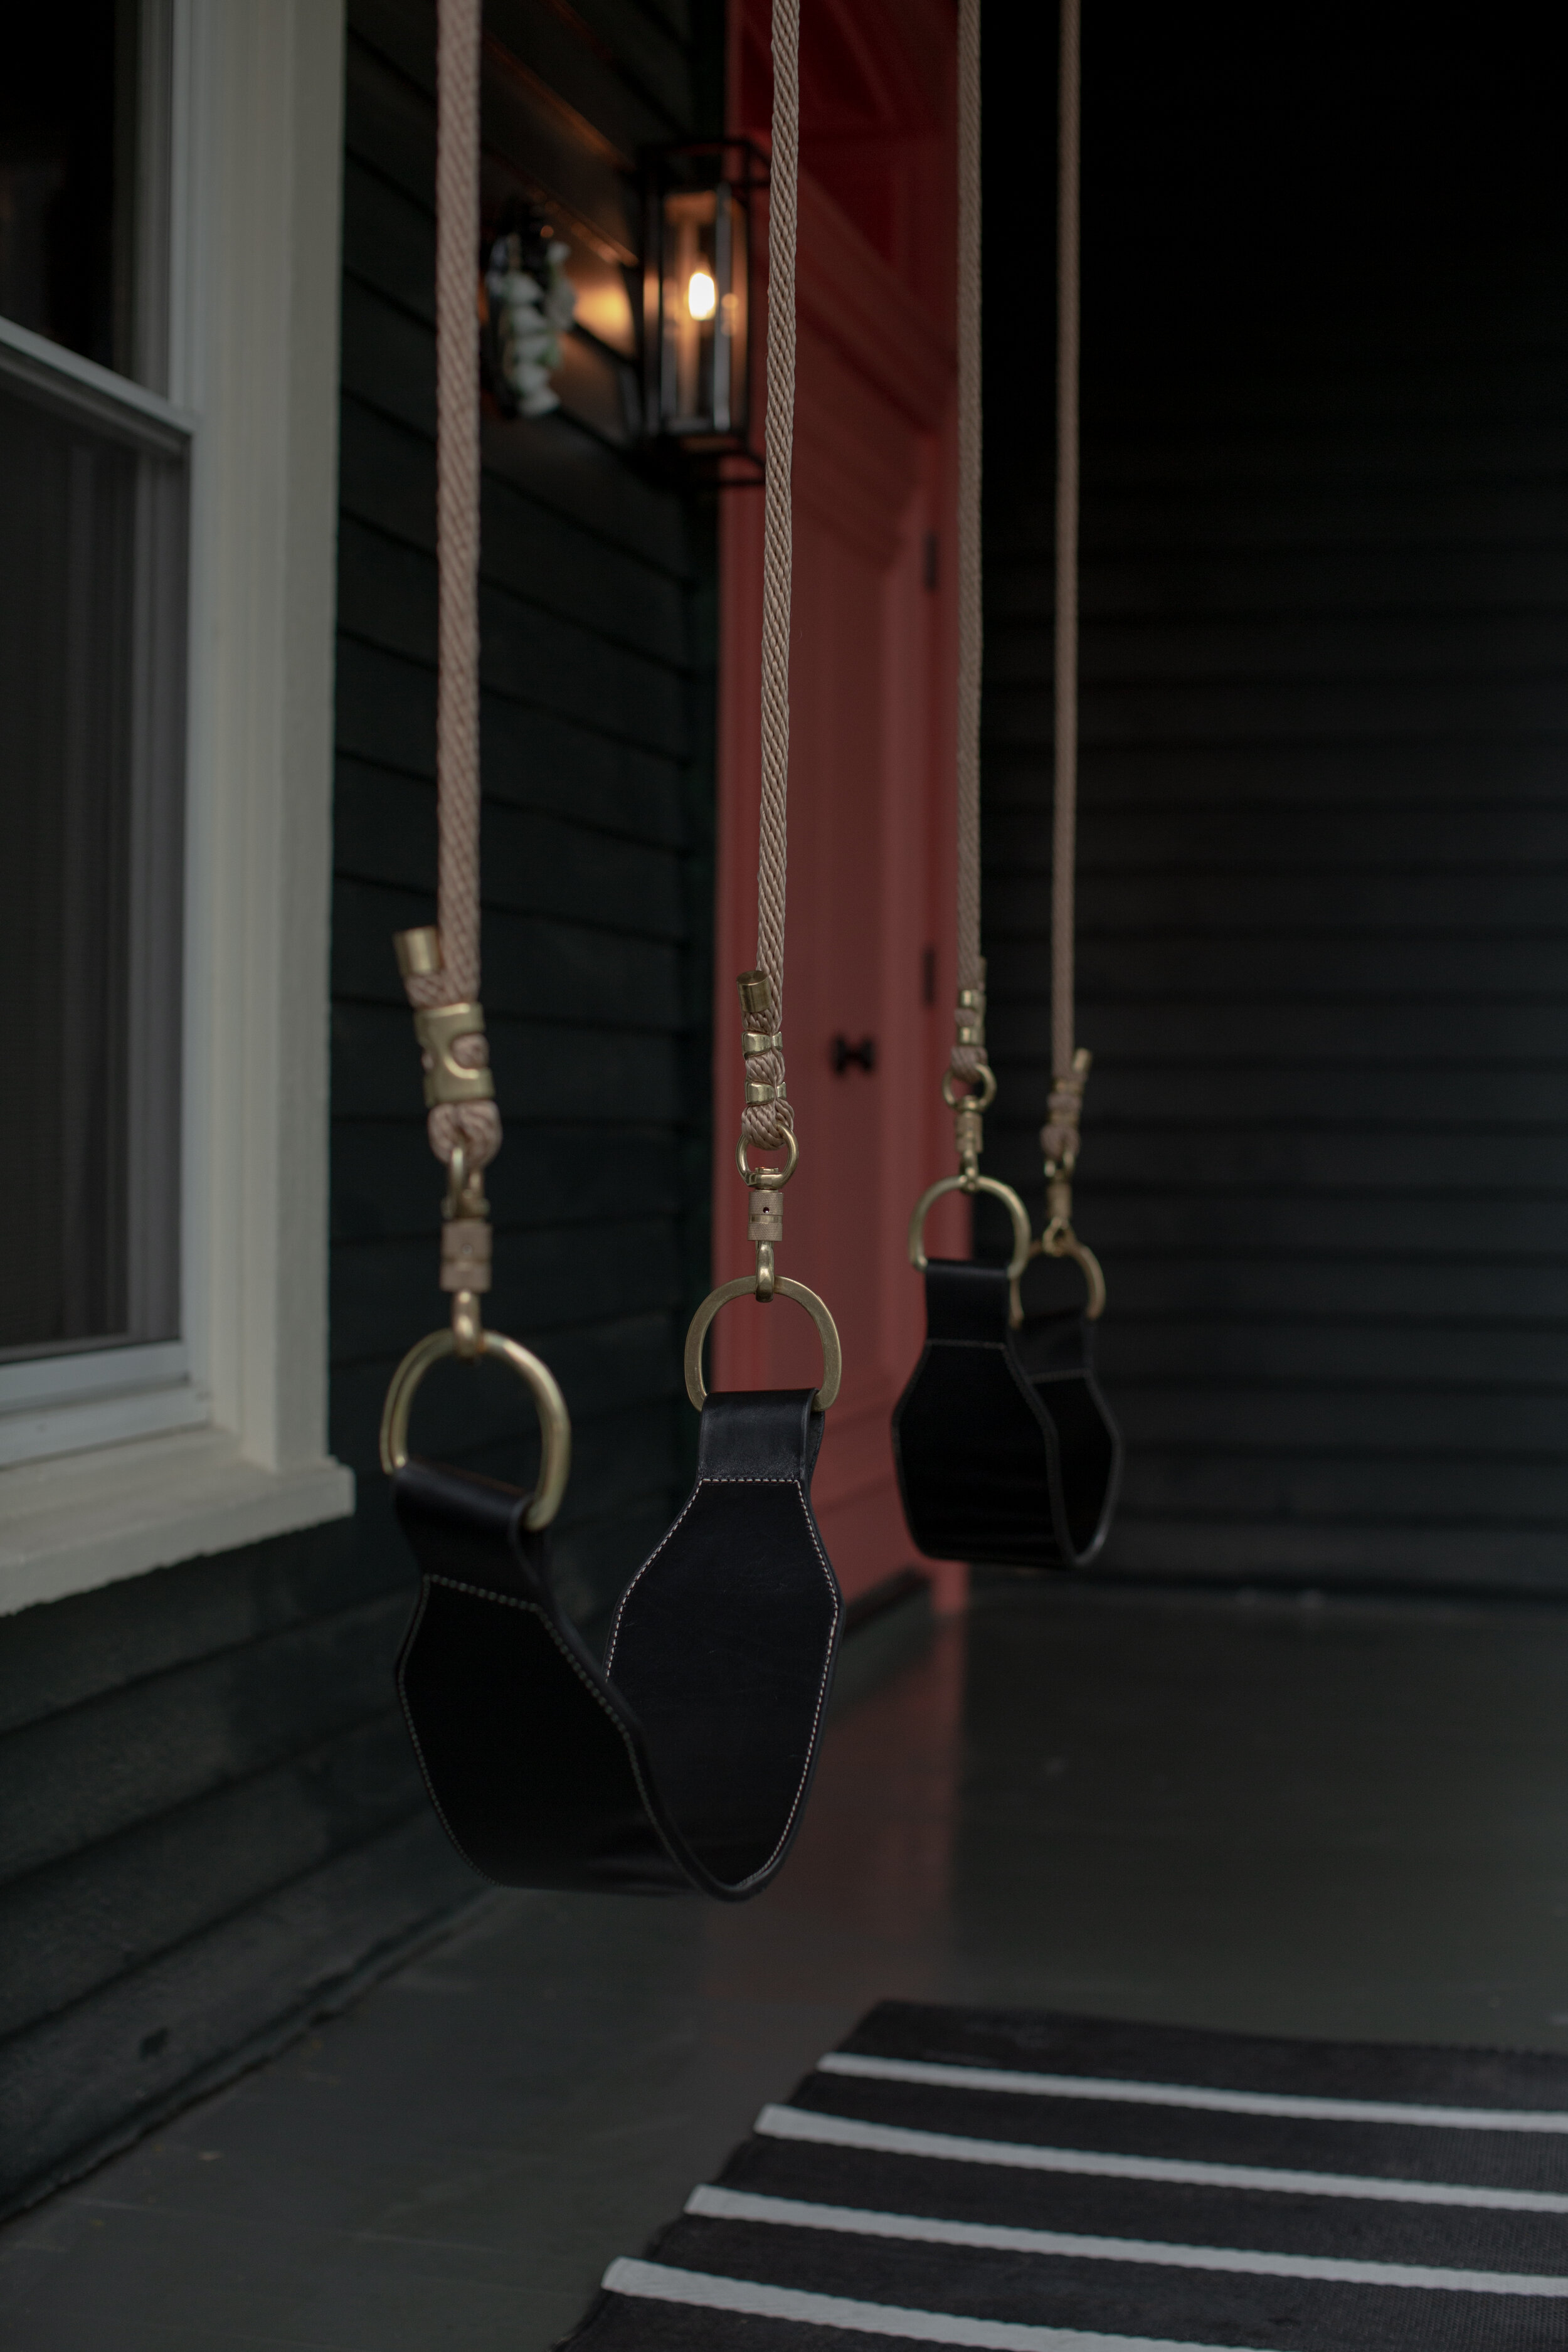 Two black leather swings shown on porch